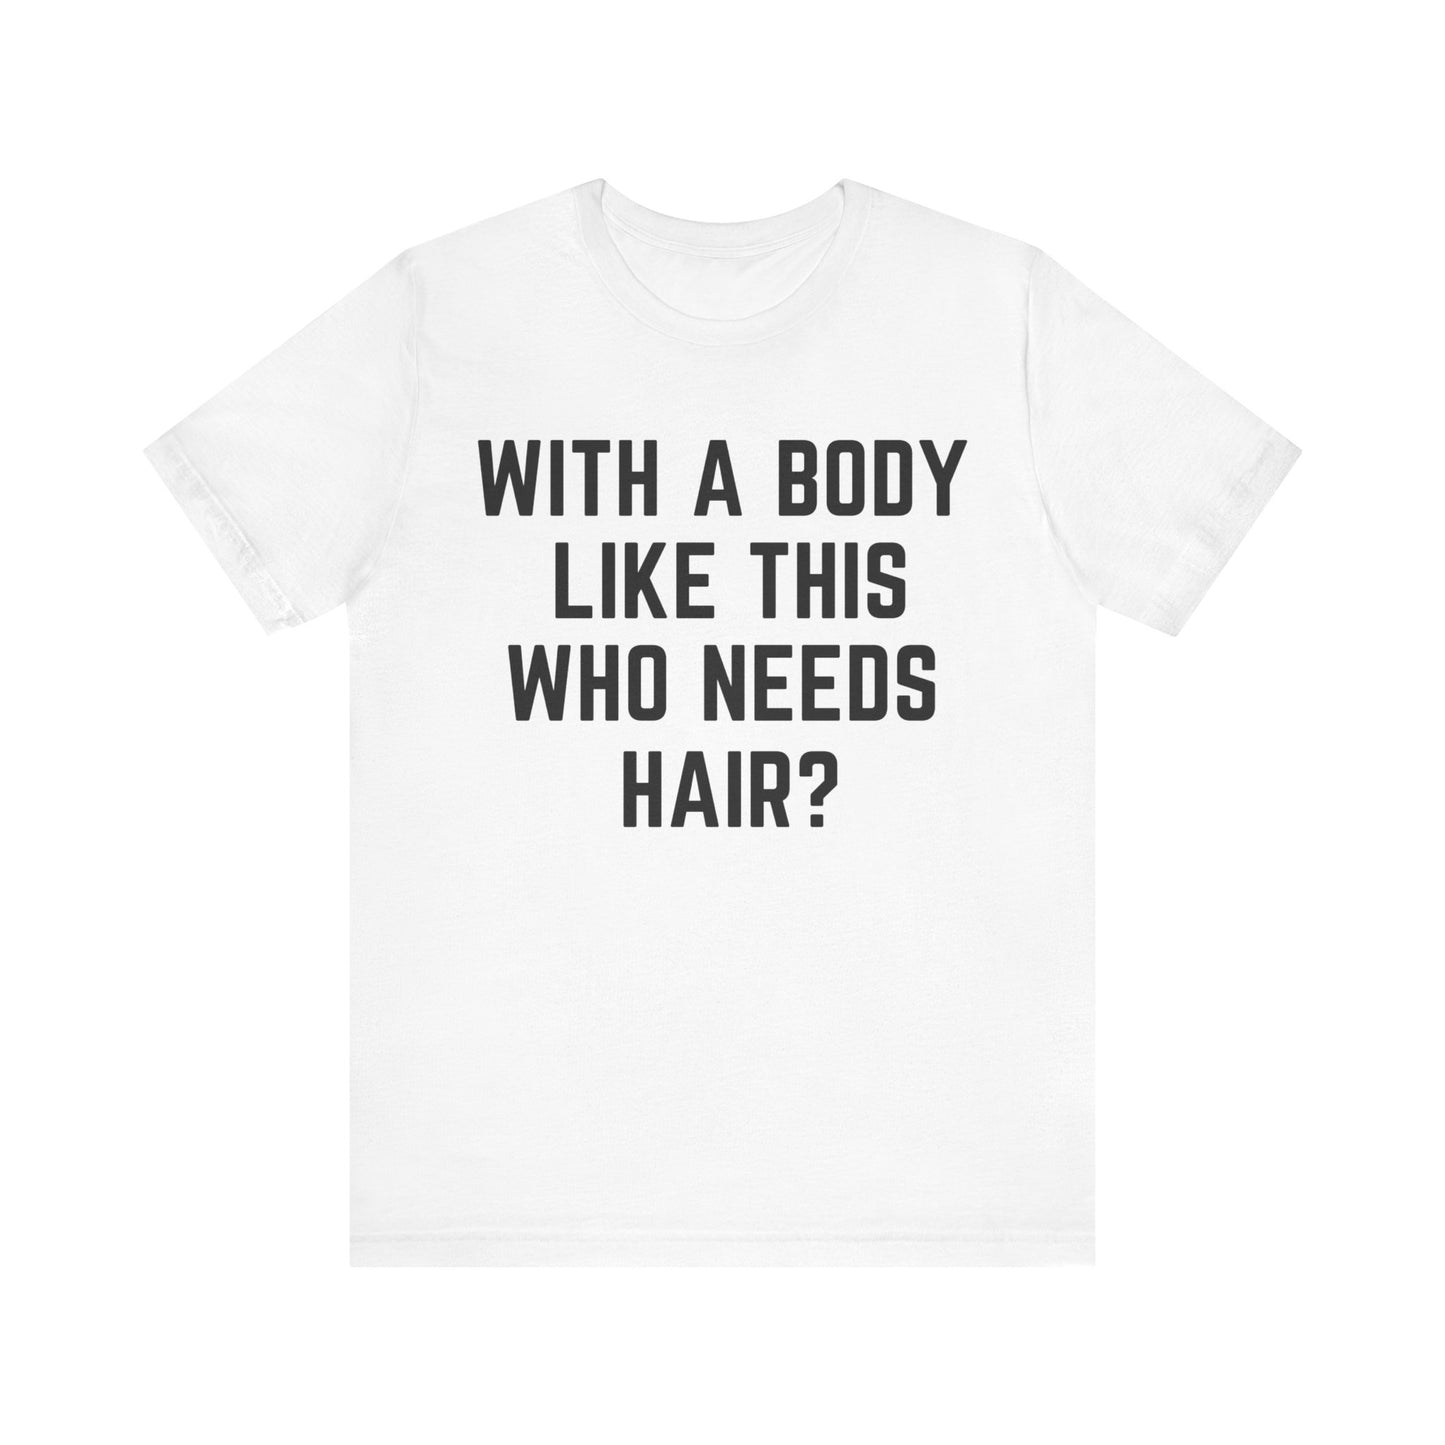 With a Body Like This Who Needs Hair Shirt, Funny Shirt for Men for Fathers Day Gift, Husband Gift, Humor T shirt, Dad Gift, T1131